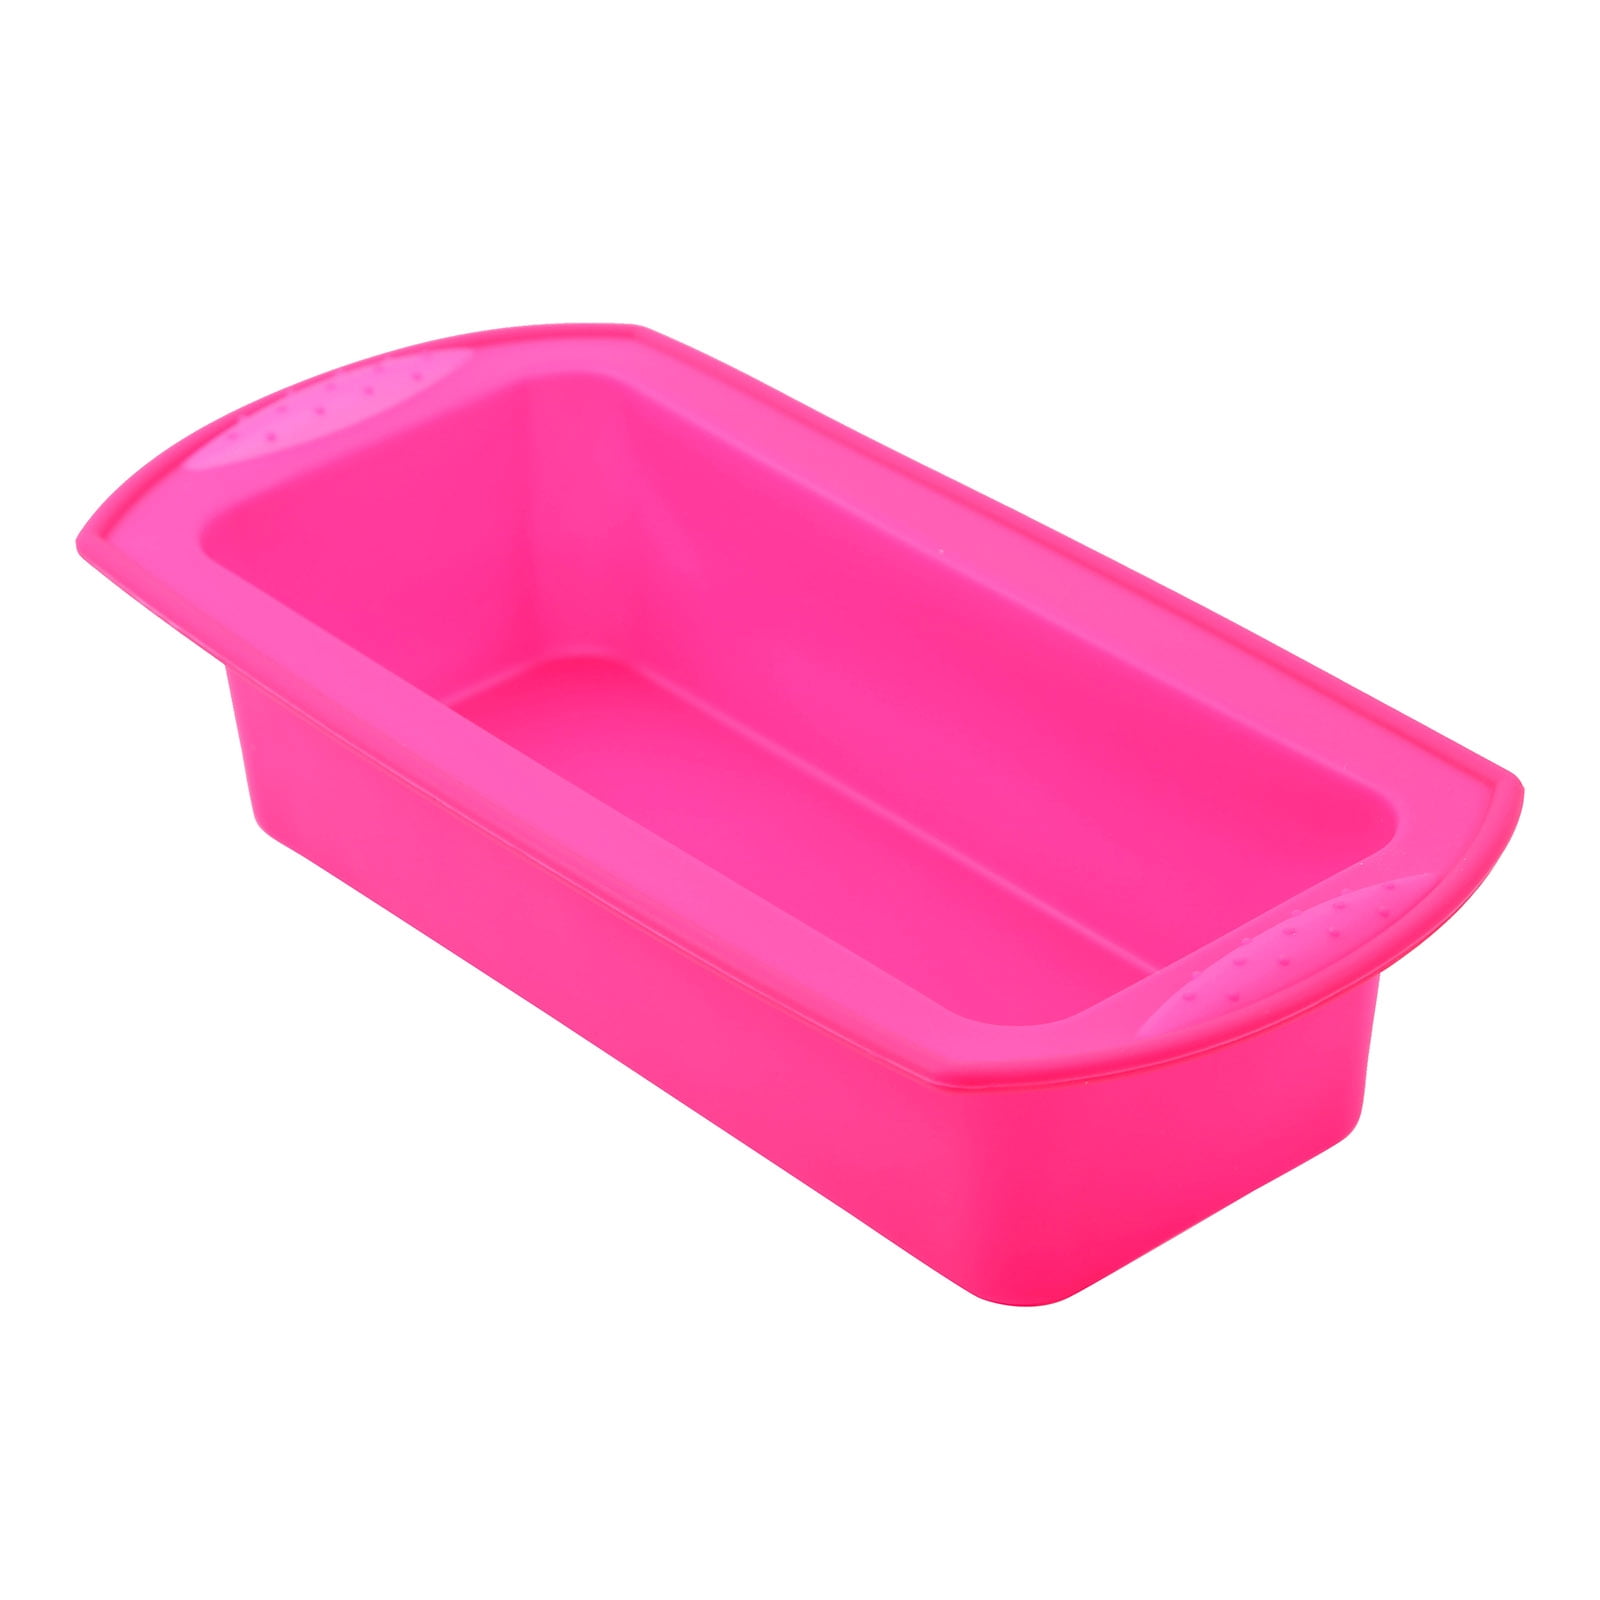 8" Silicone Loaf Mould Tin Non Stick Rectangle Baking Oven Pan Tray Bread Mold 